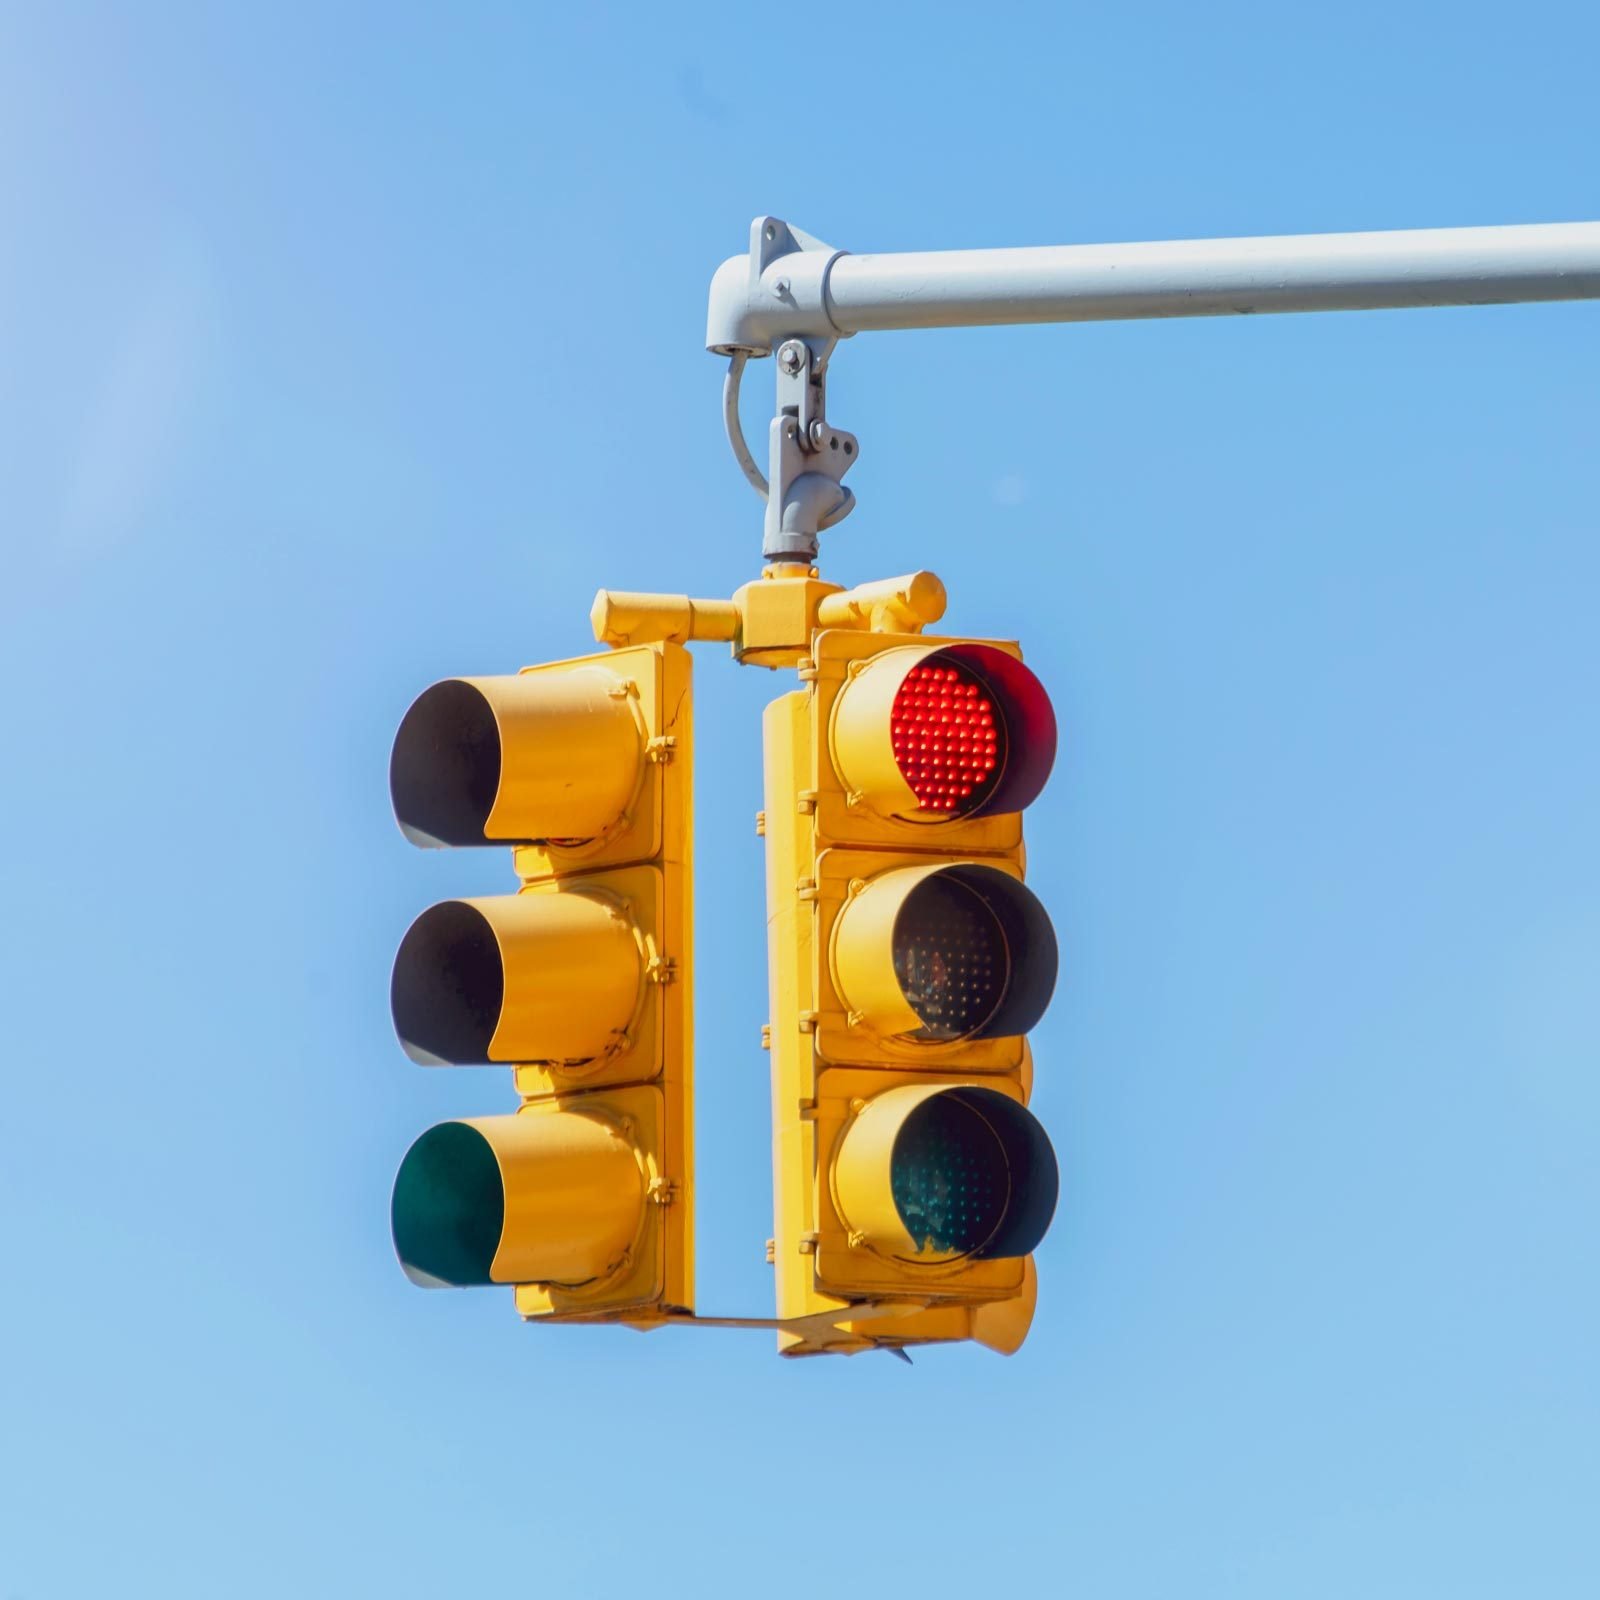 Stuck Waiting At a Stoplight? Here's How to Let the Sensor Know